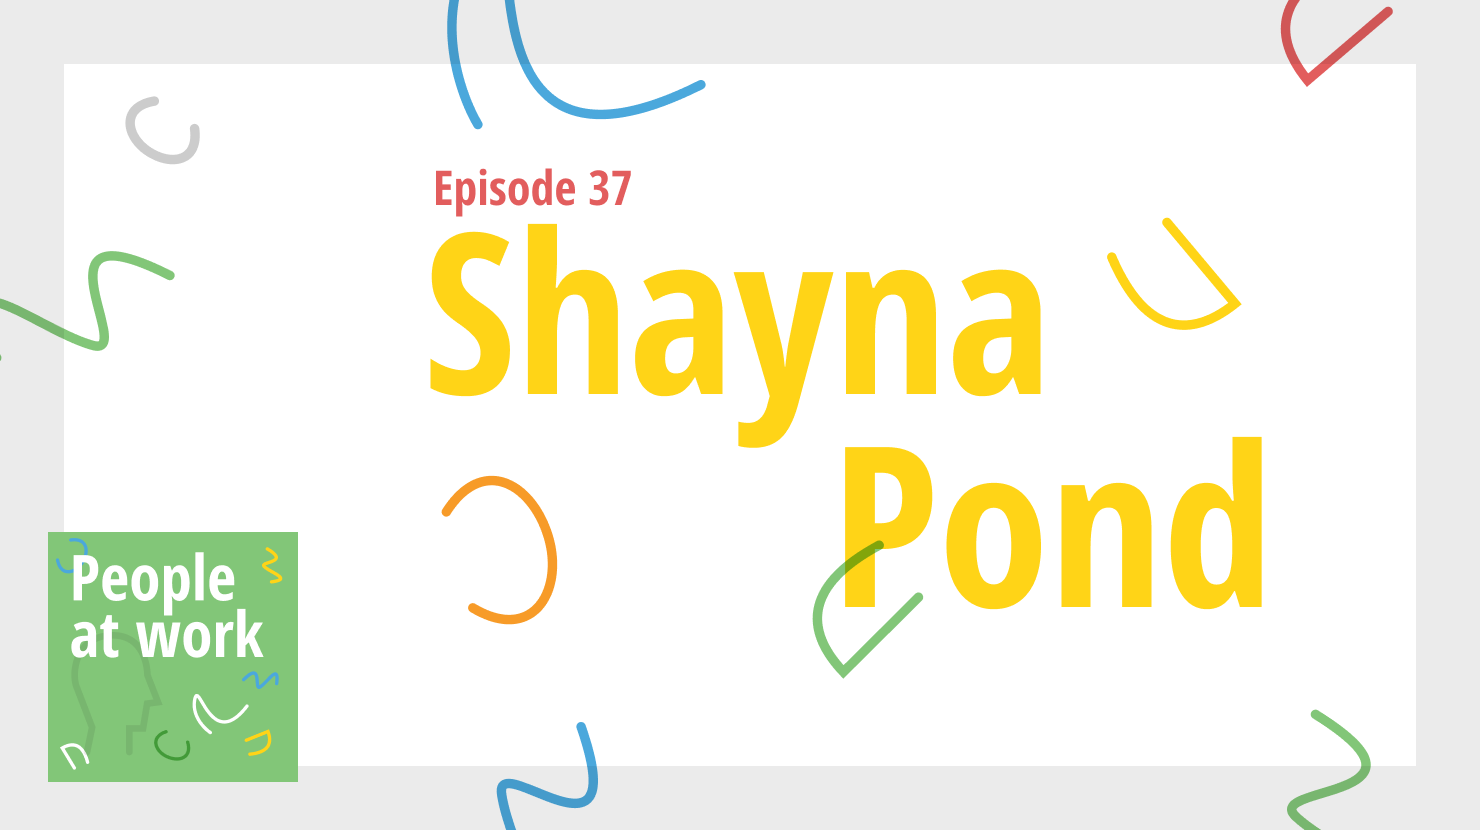 Focus on relationships to build your culture says Shayna Pond